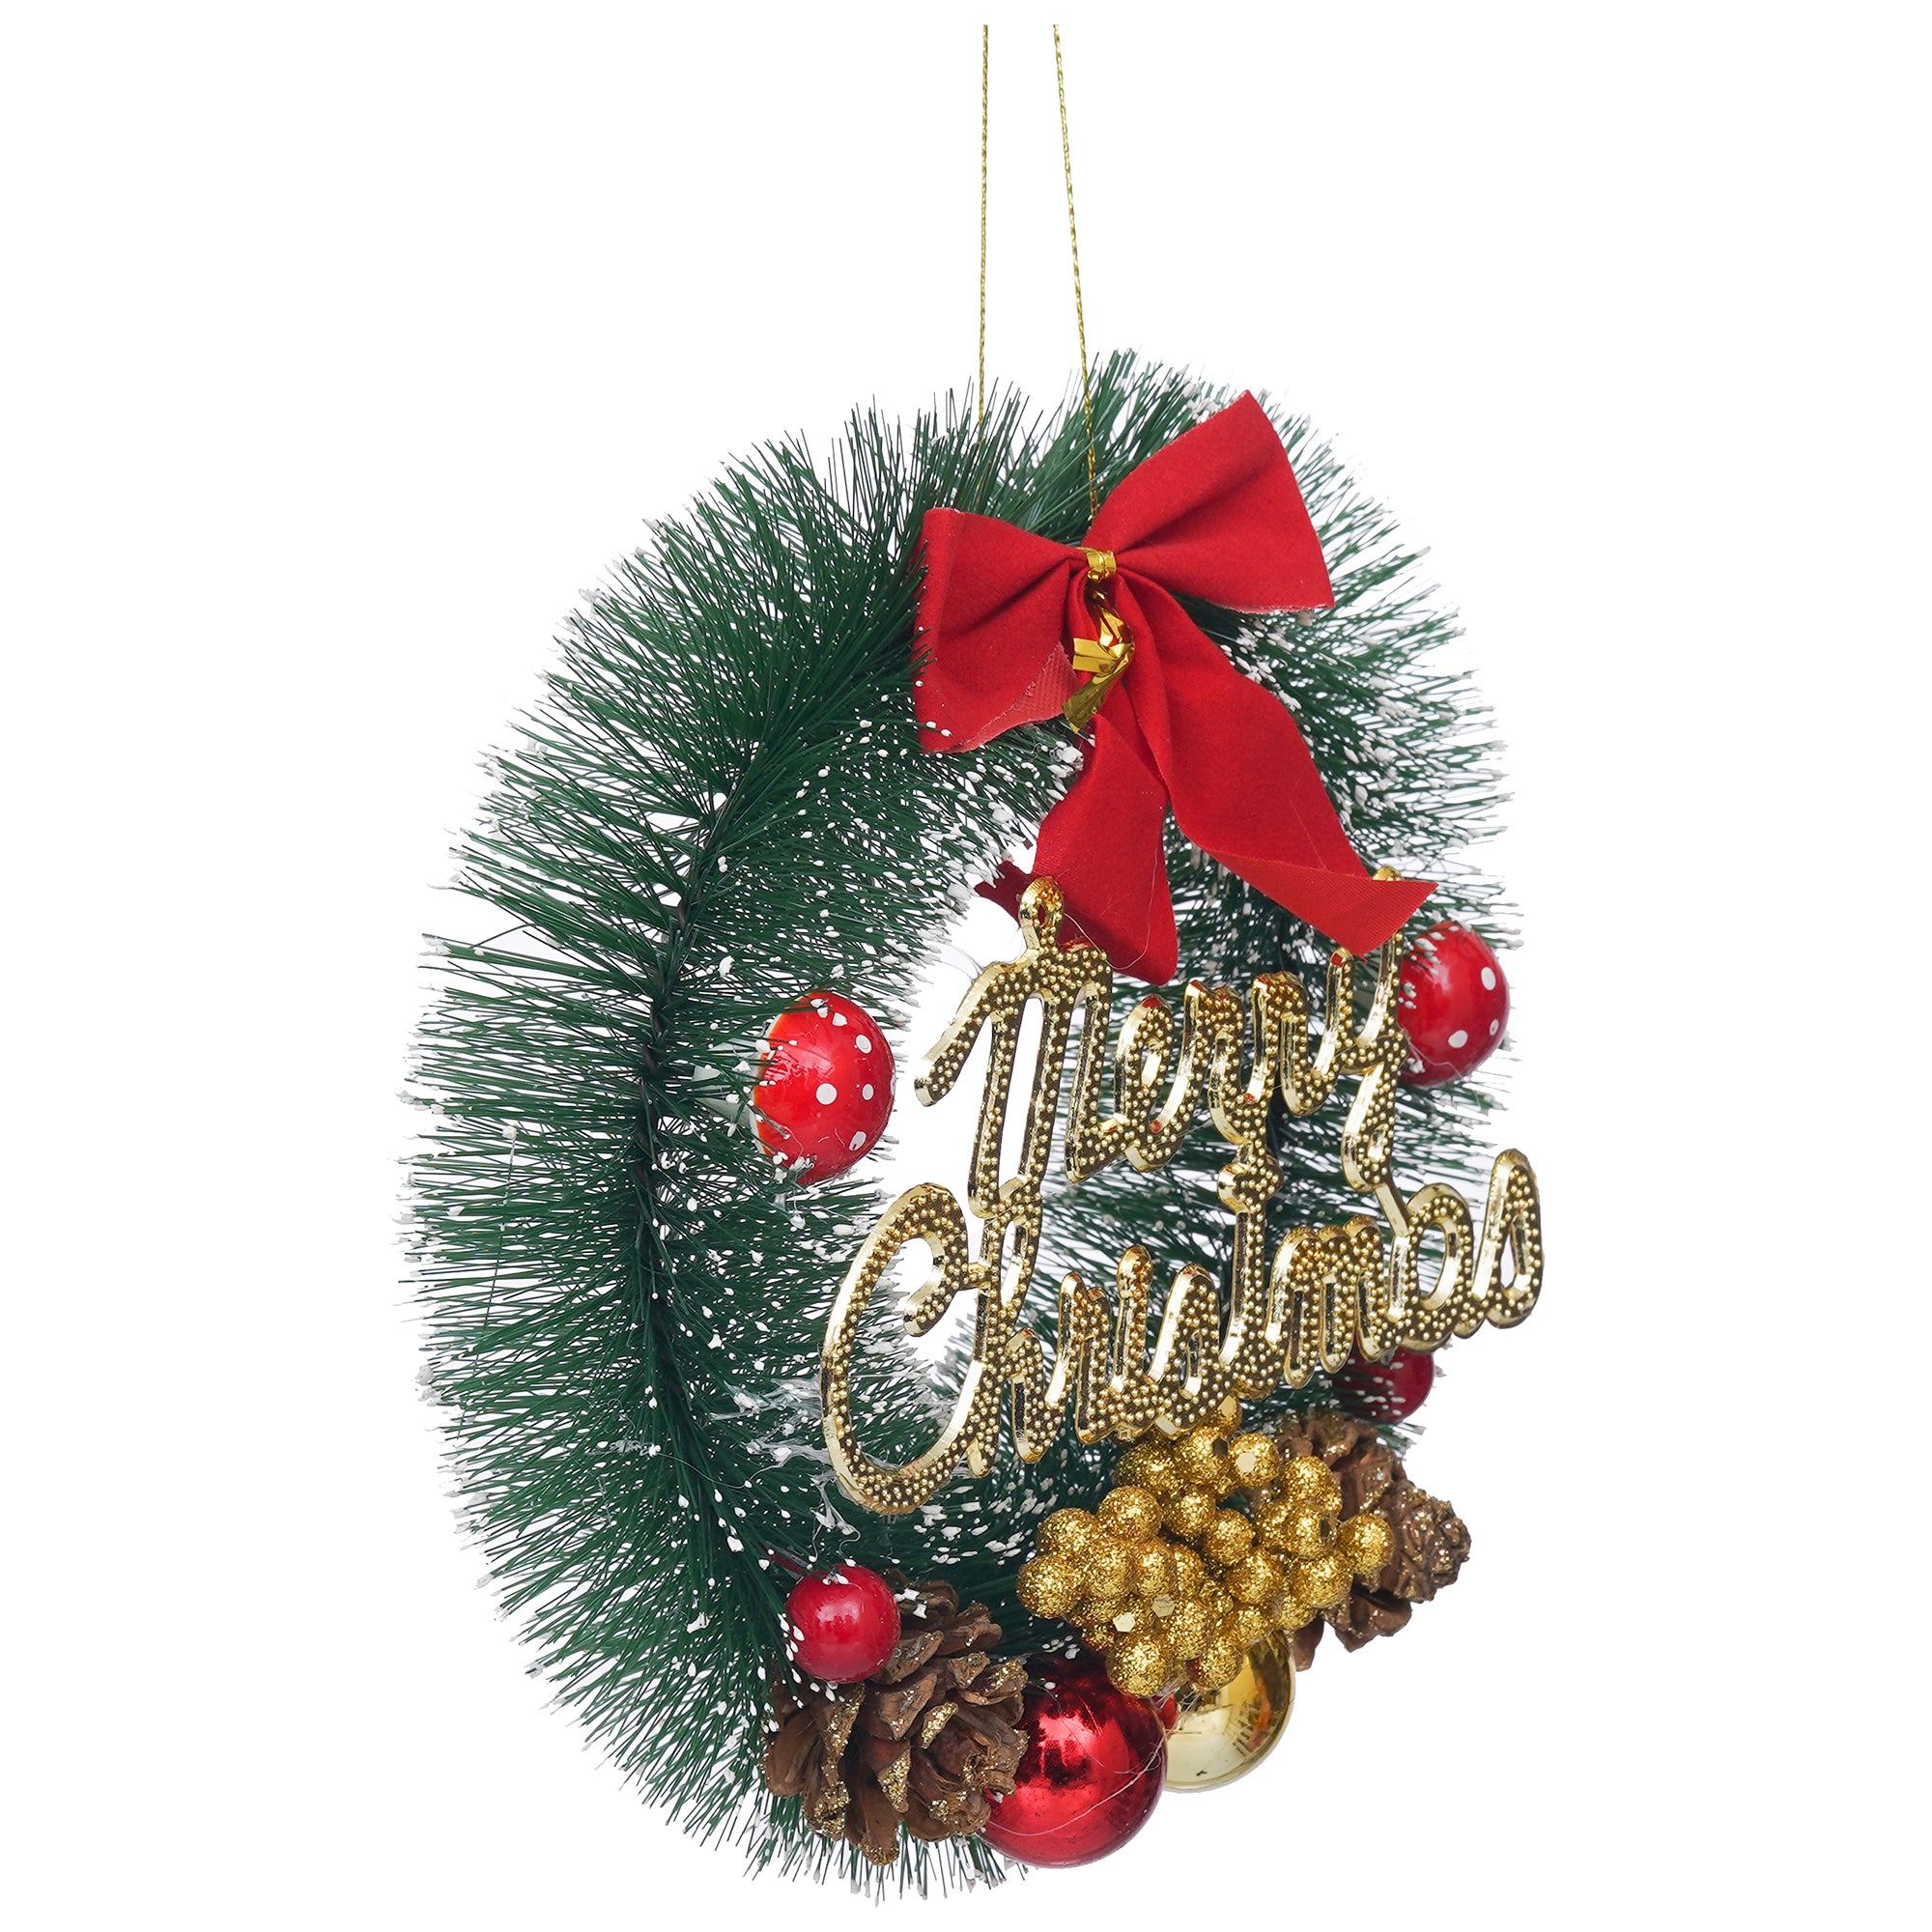 eCraftIndia Merry Christmas Wreath With Berries, Balls, Flowers, Ribbon  Christmas Front Door Ornament and Wall Decoration  Artificial Pine Garland for Xmas Party Decor 6